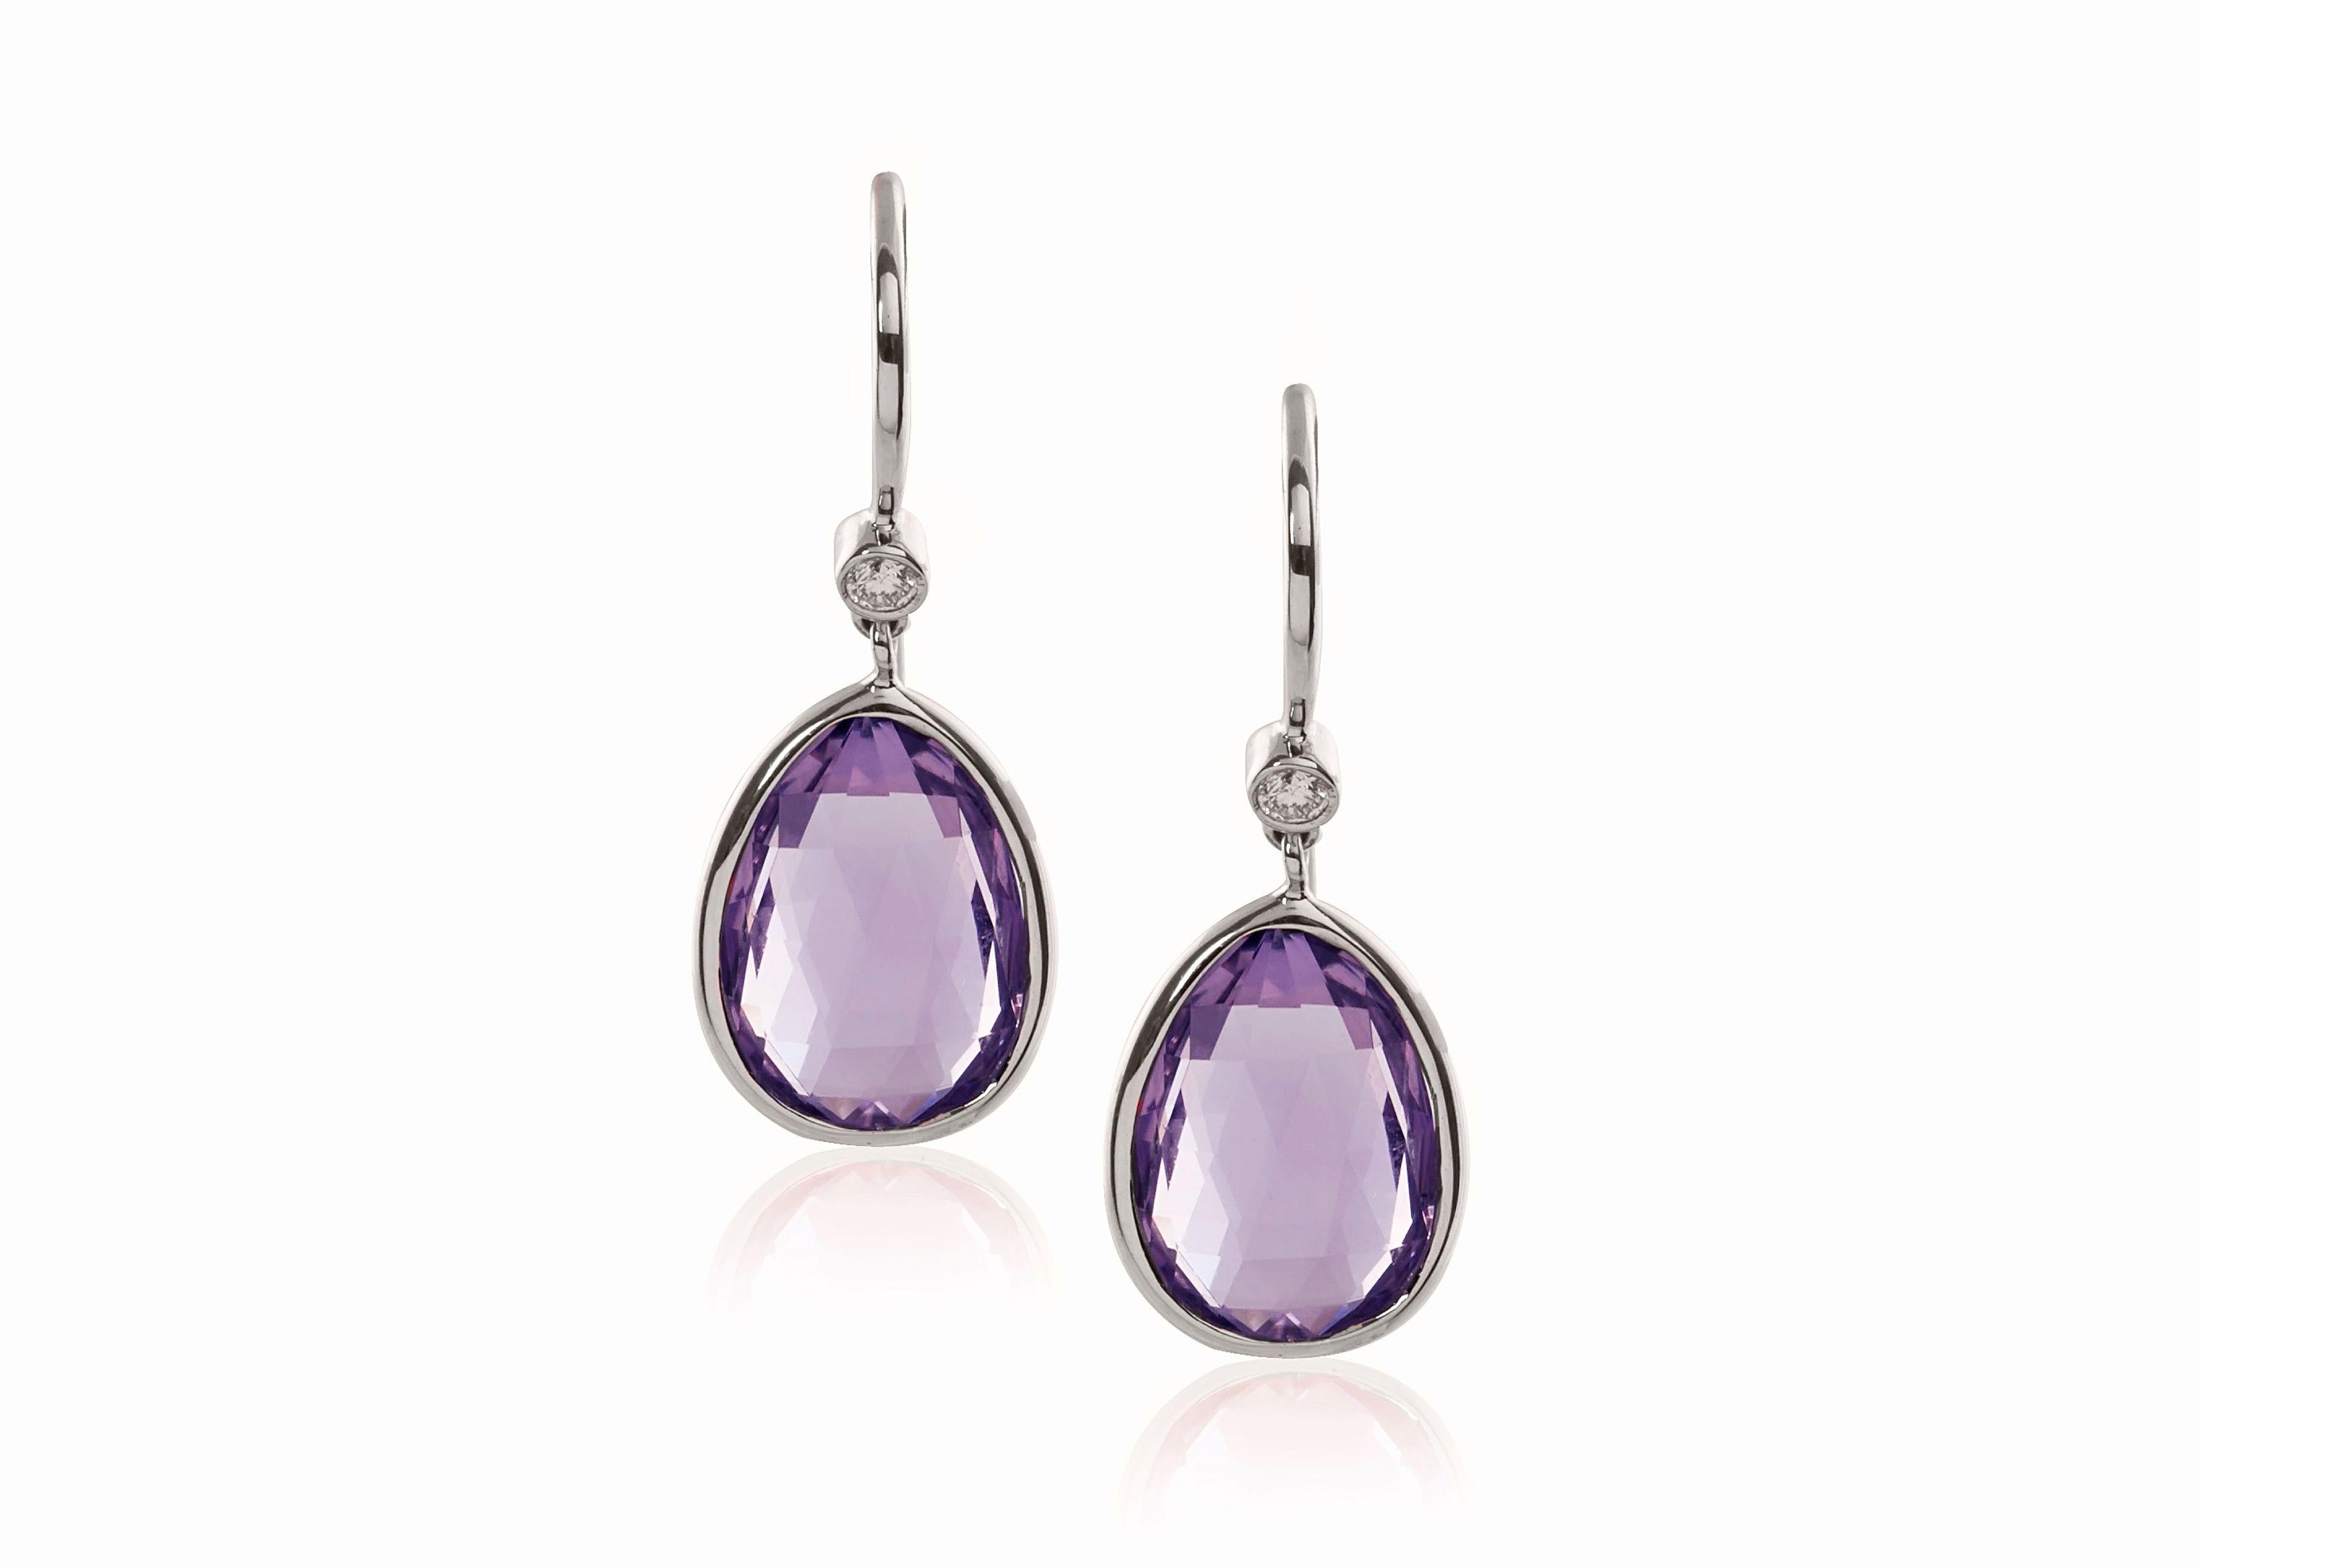 Amethyst Pear Shape Briolette with Diamond Earrings in 18K White Gold, from 'Gossip' Collection

Stone size: 14 x 20 mm

Gemstone Approx Wt: Amethyst - 28.43 Carats

Diamonds: G-H / VS, Approx Wt: 0.14 Carats 